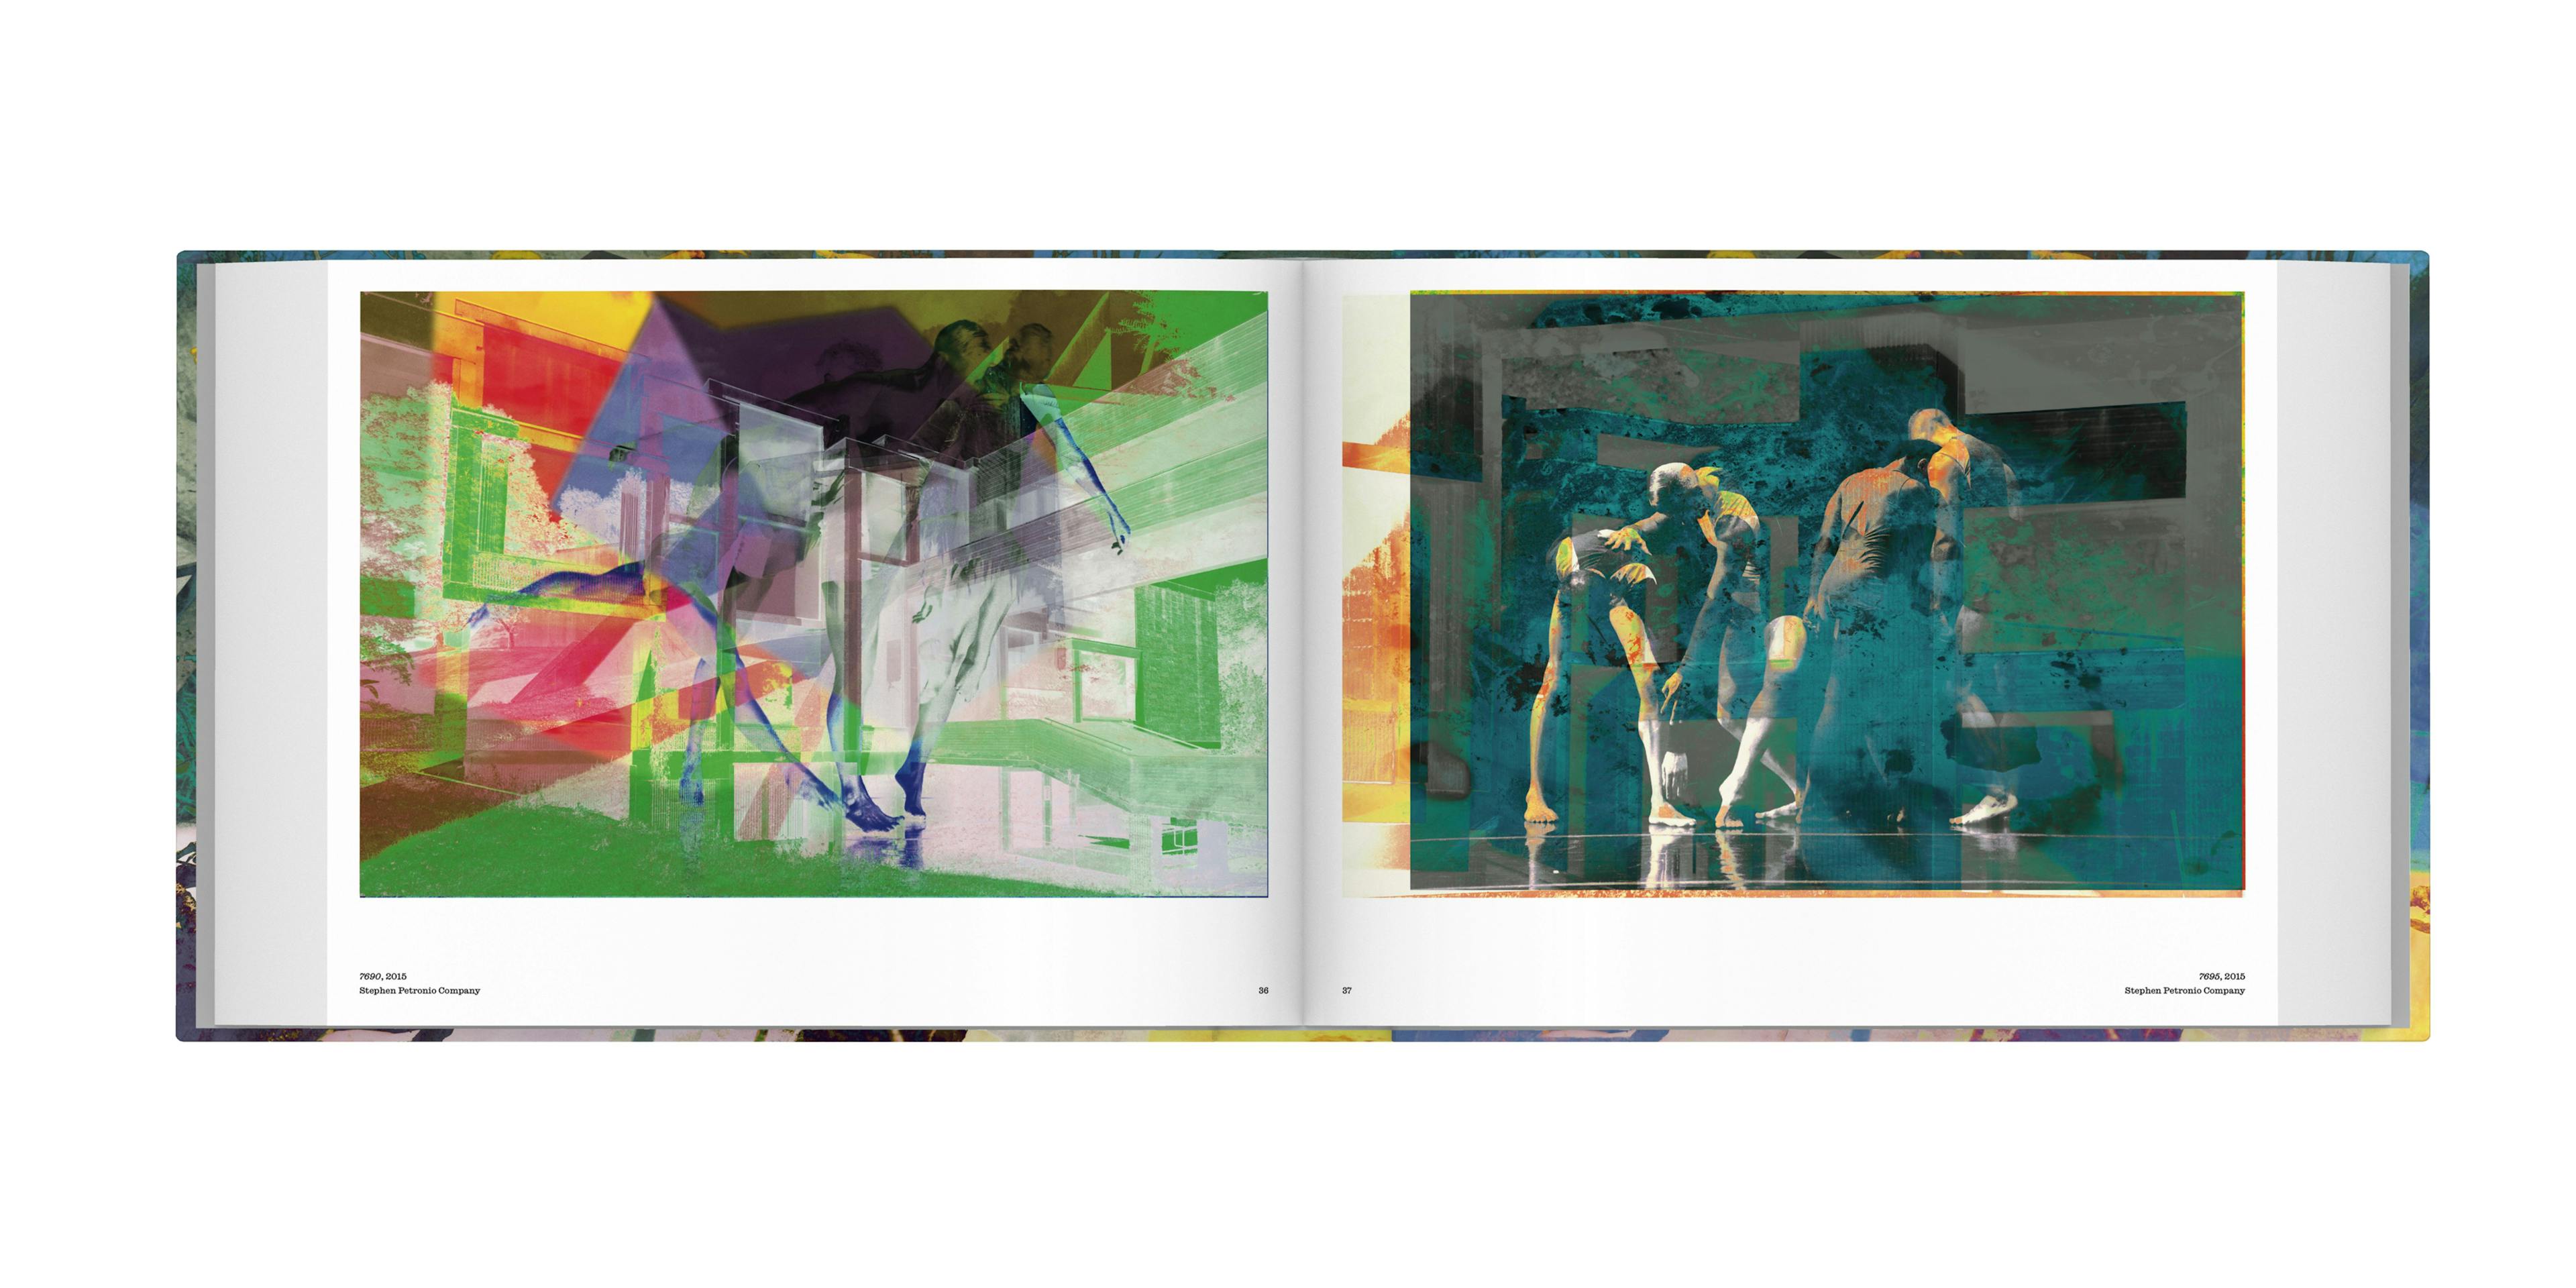 A spread of James Welling: Choreograph published by Aperture, 2020.